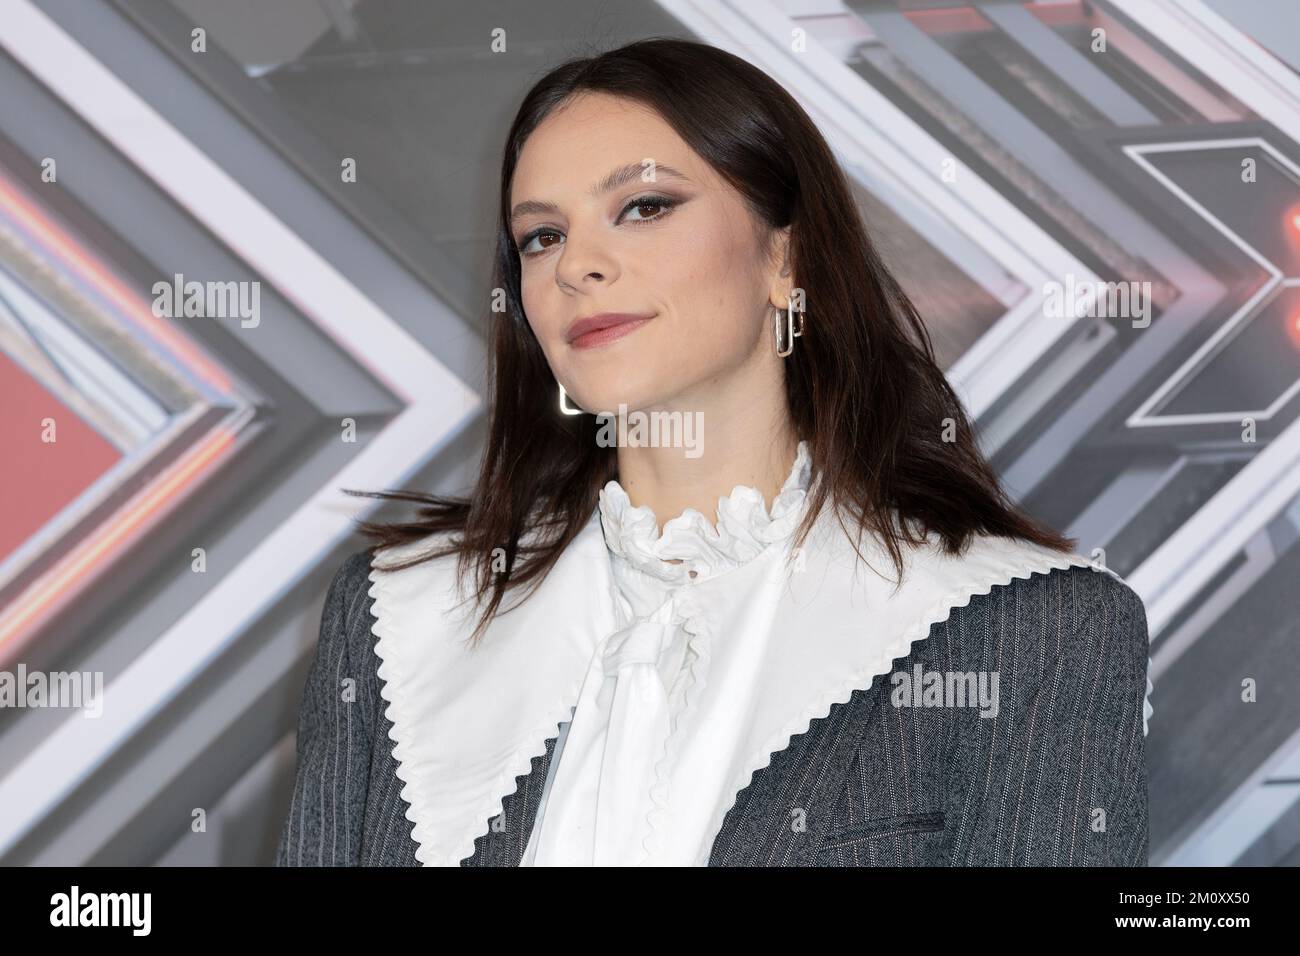 MILAN, ITALY - Dec 6, 2022 : Singer Francesca Michielin attends the press conference of X Factor Italy Final 2022 at Forum Assago in Milan, Italy. Stock Photo